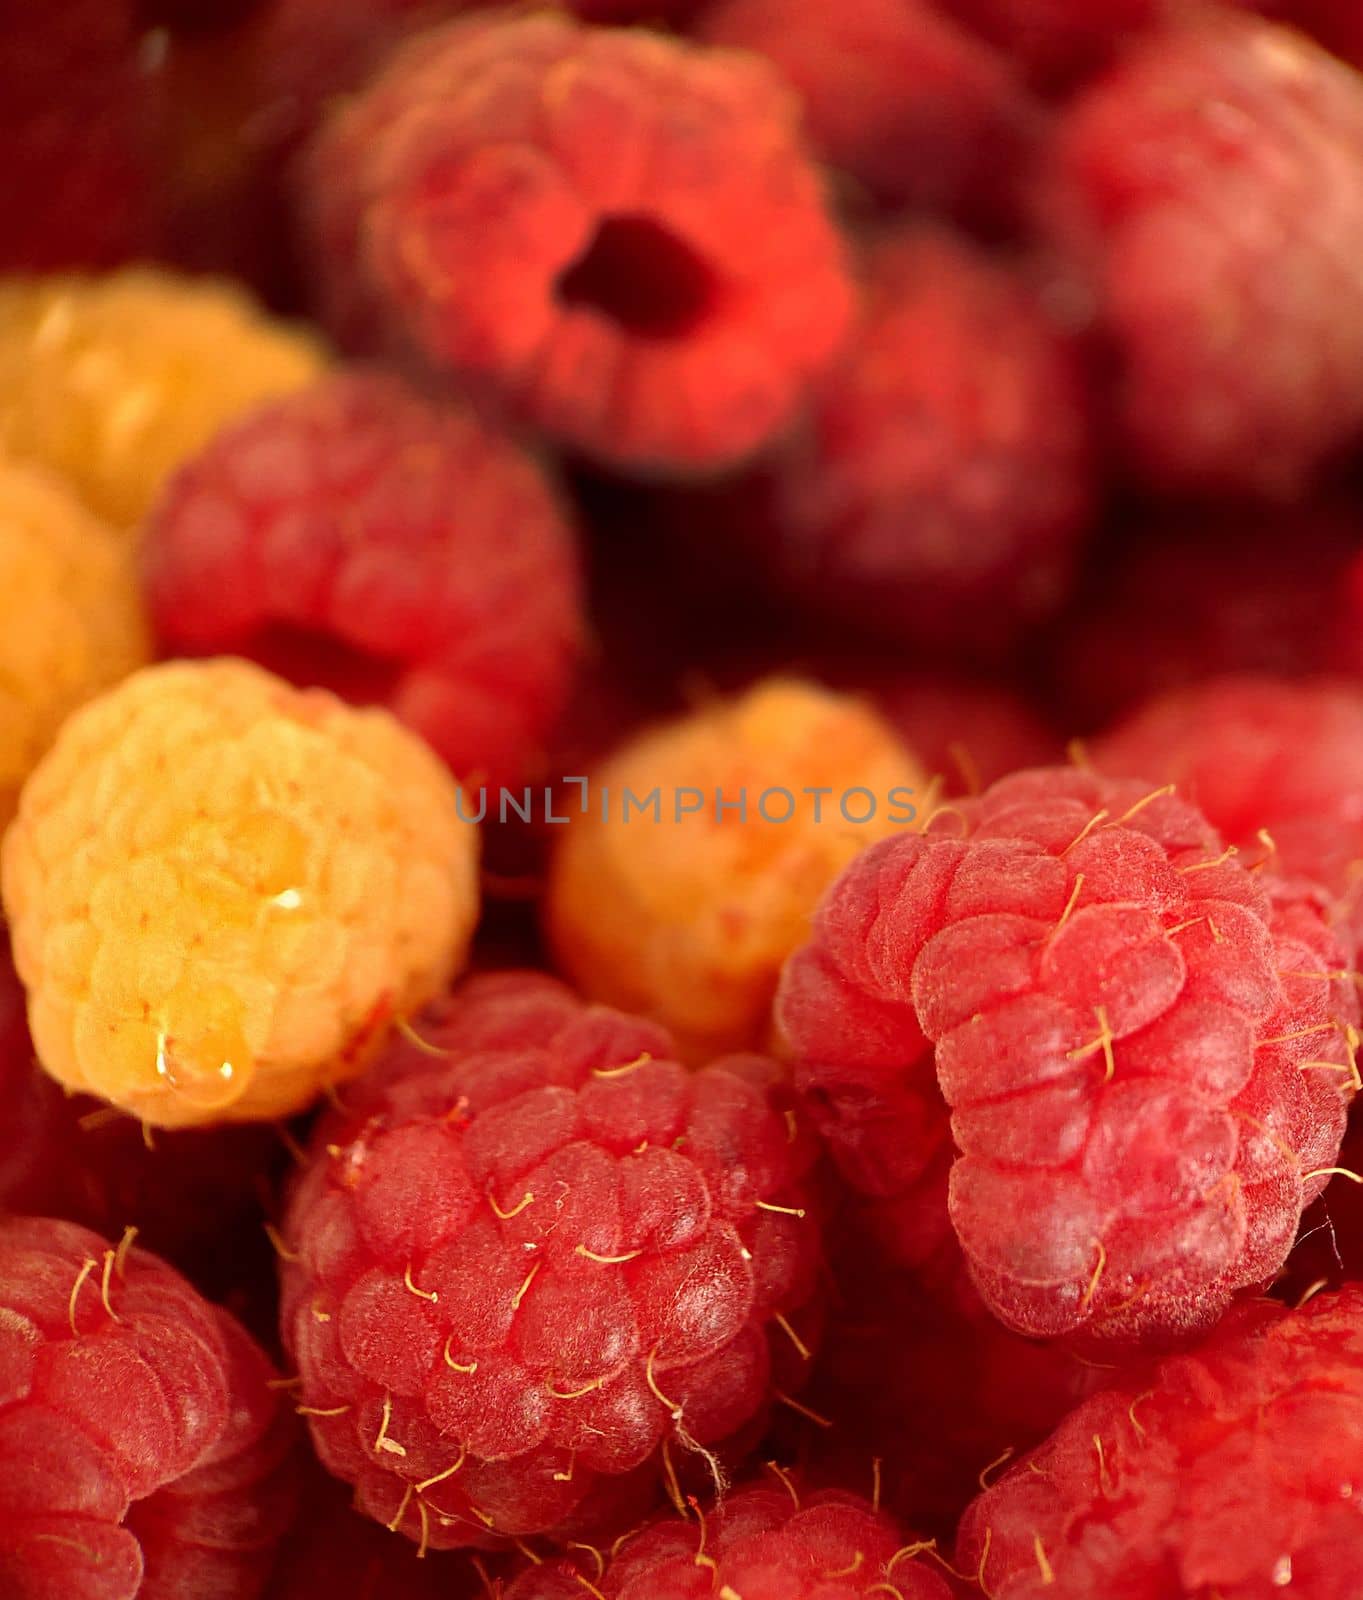 Red and yellow raspberries enriched with vitamins close-up by Mastak80